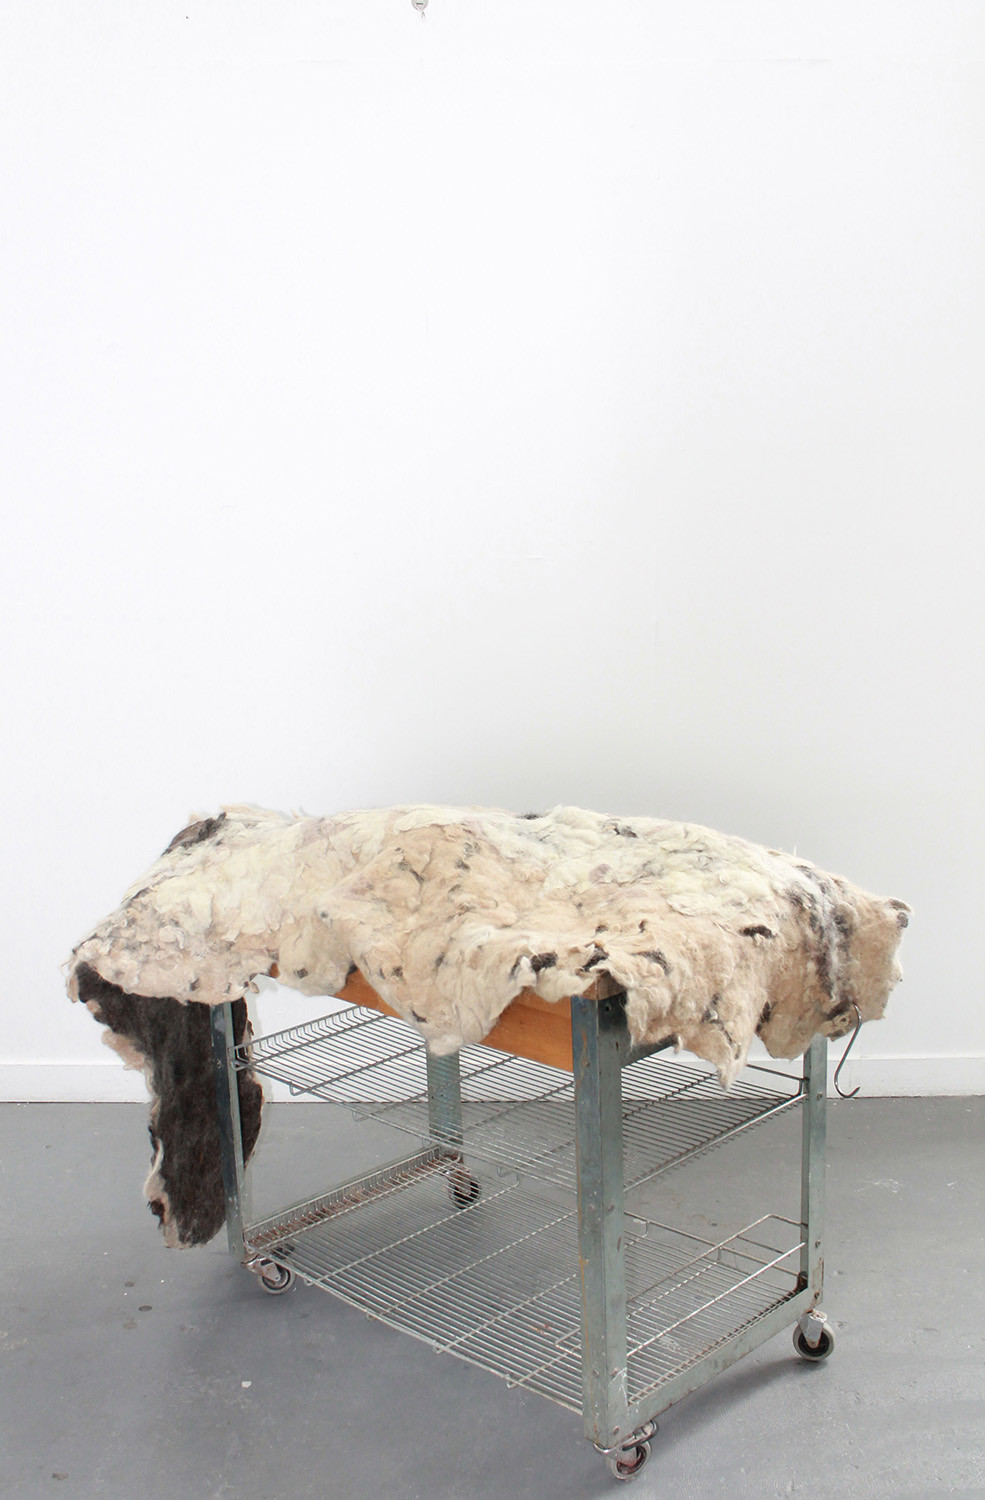 *Dolores Ipsum*, felted wool fleece and dog fur with butcher's block, 227 x 114 cm (installation view)